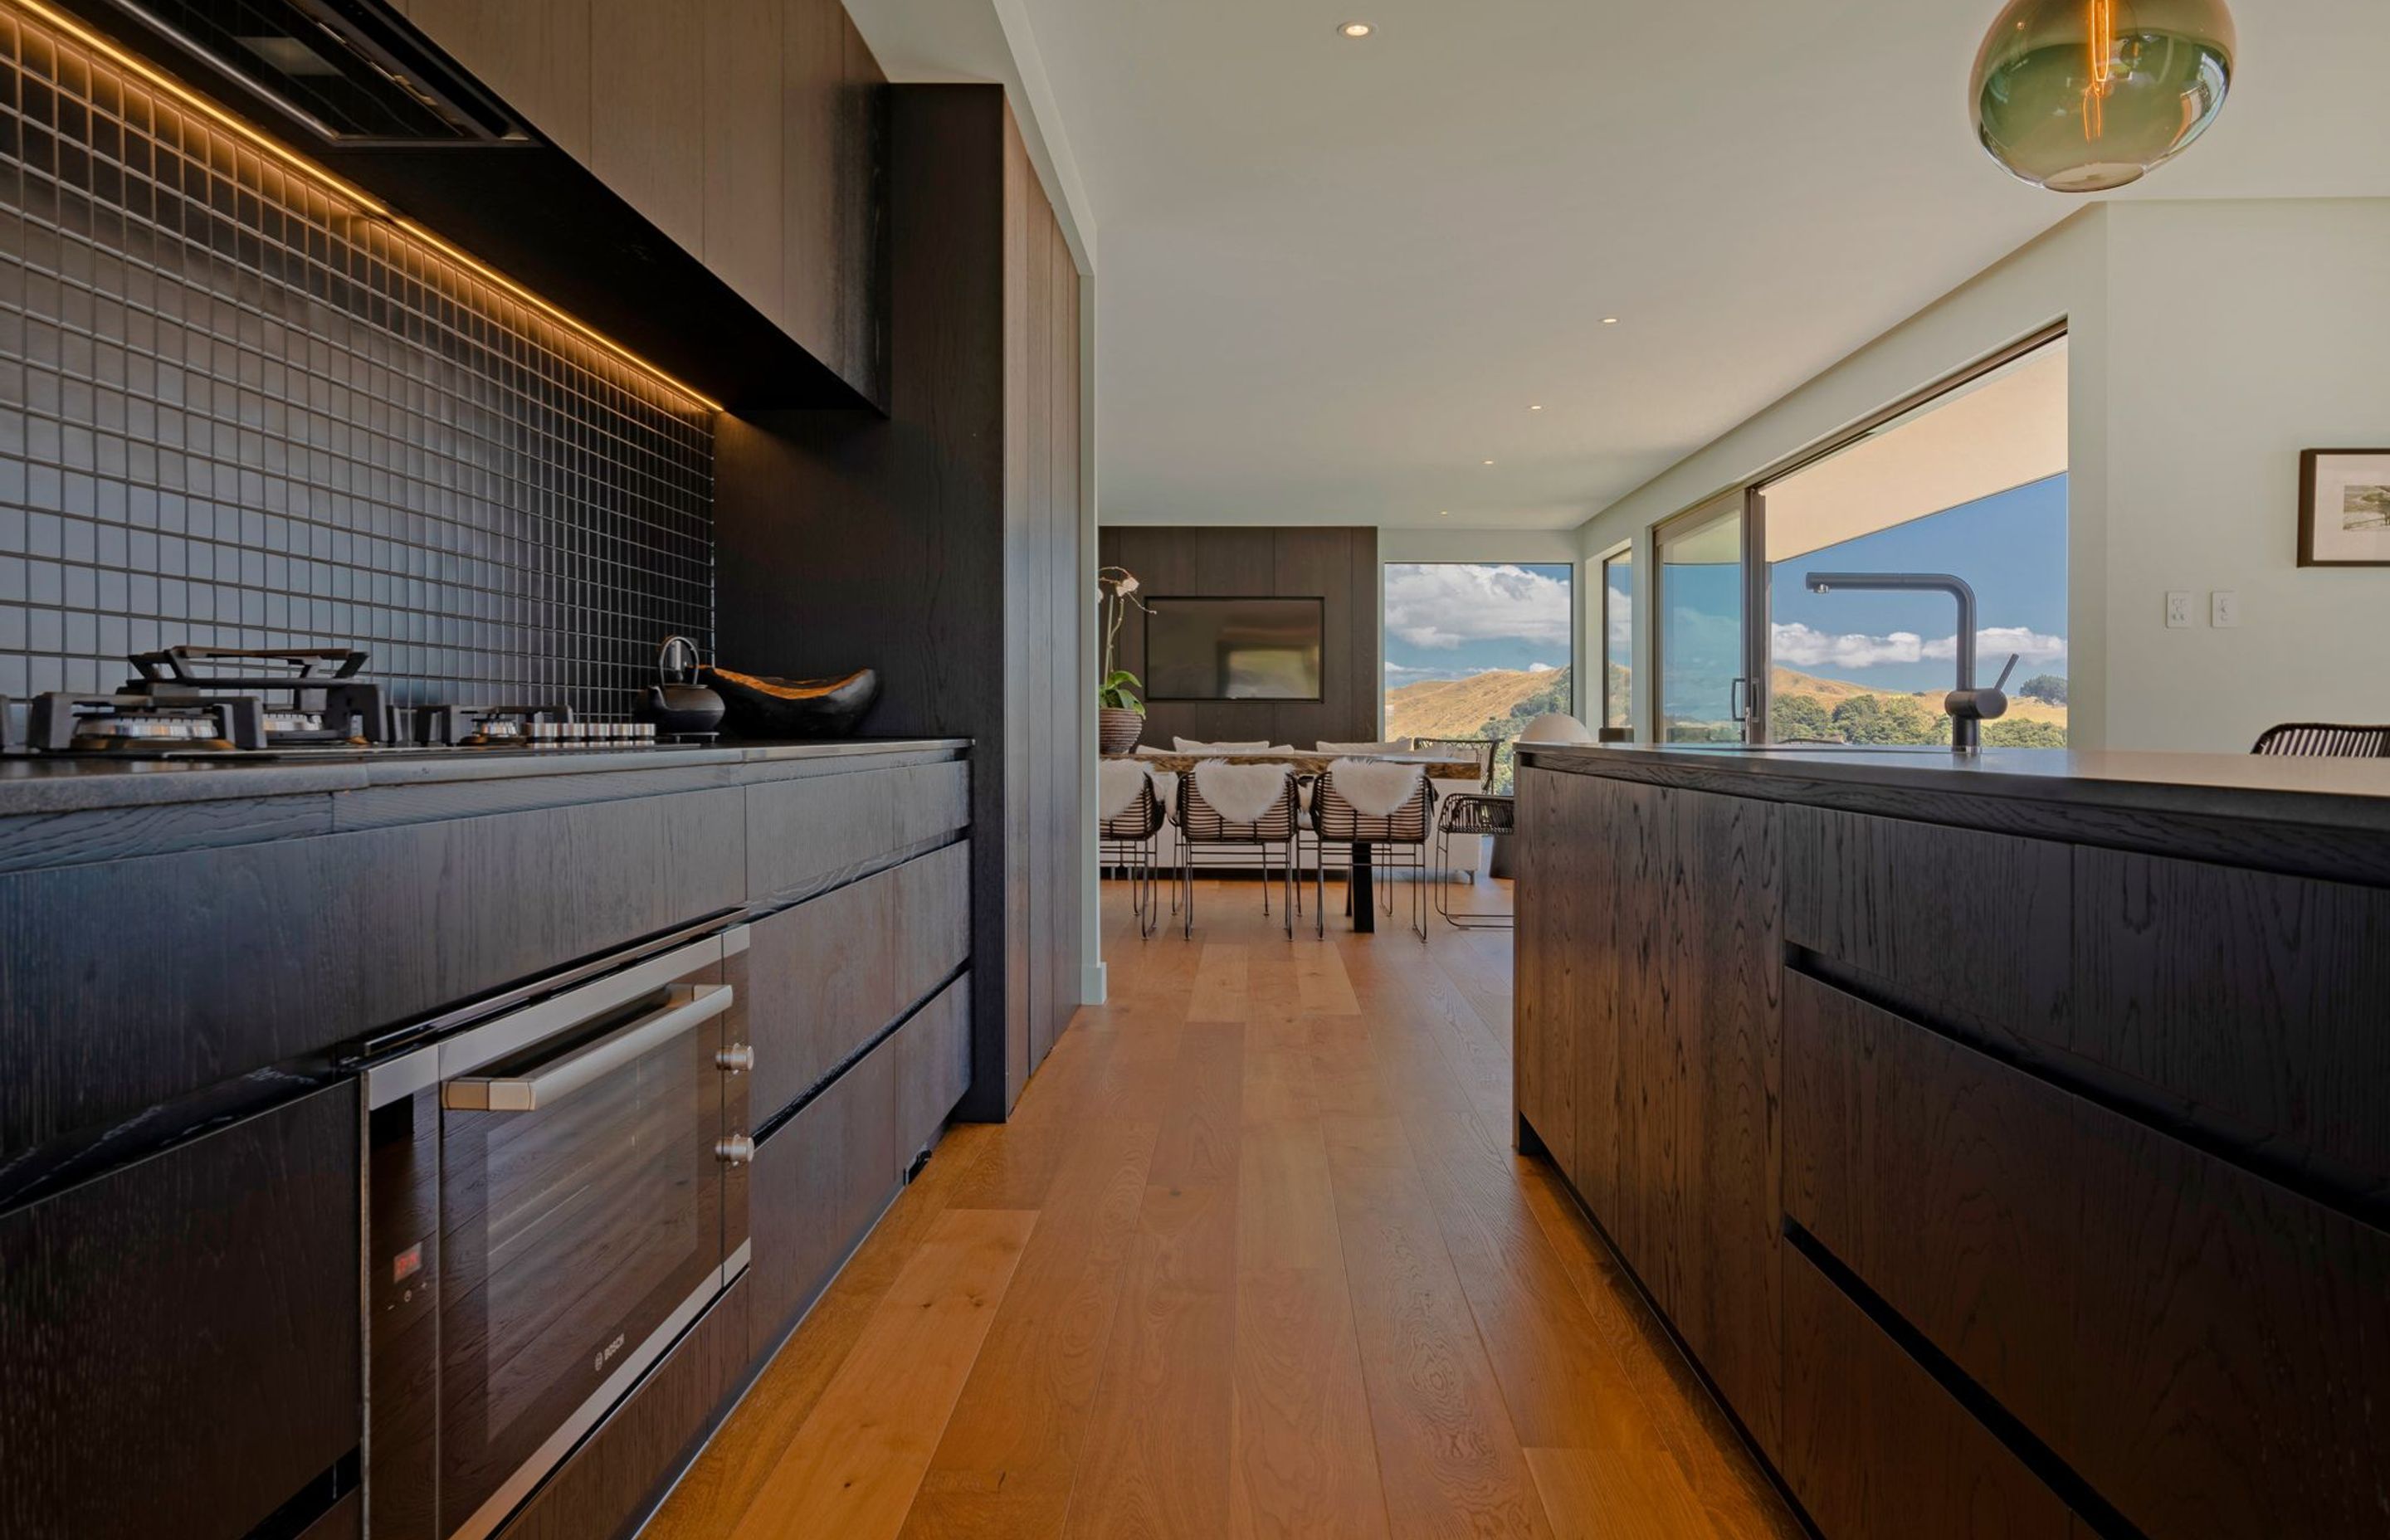 The kitchen takes notes from the home's exterior with a dark colour palette.